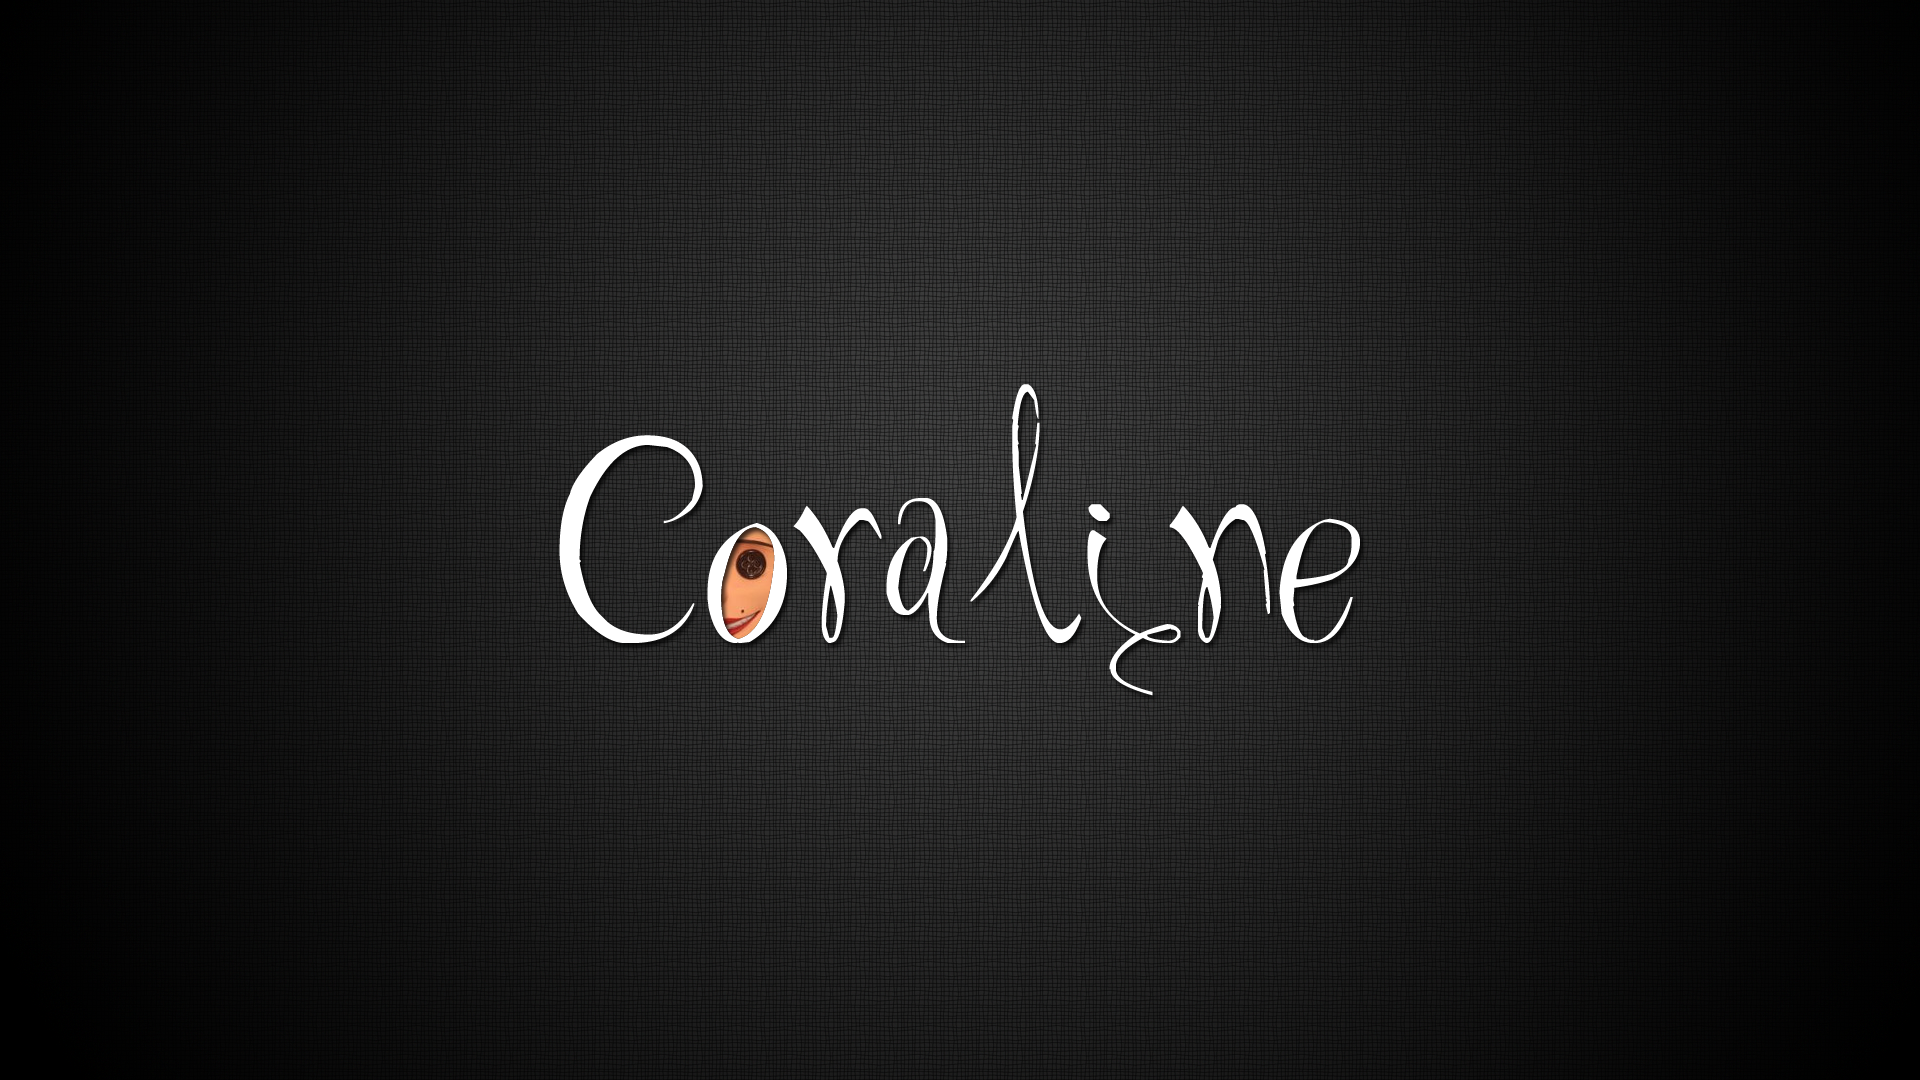 Coraline Wallpaper By Somebodyslime